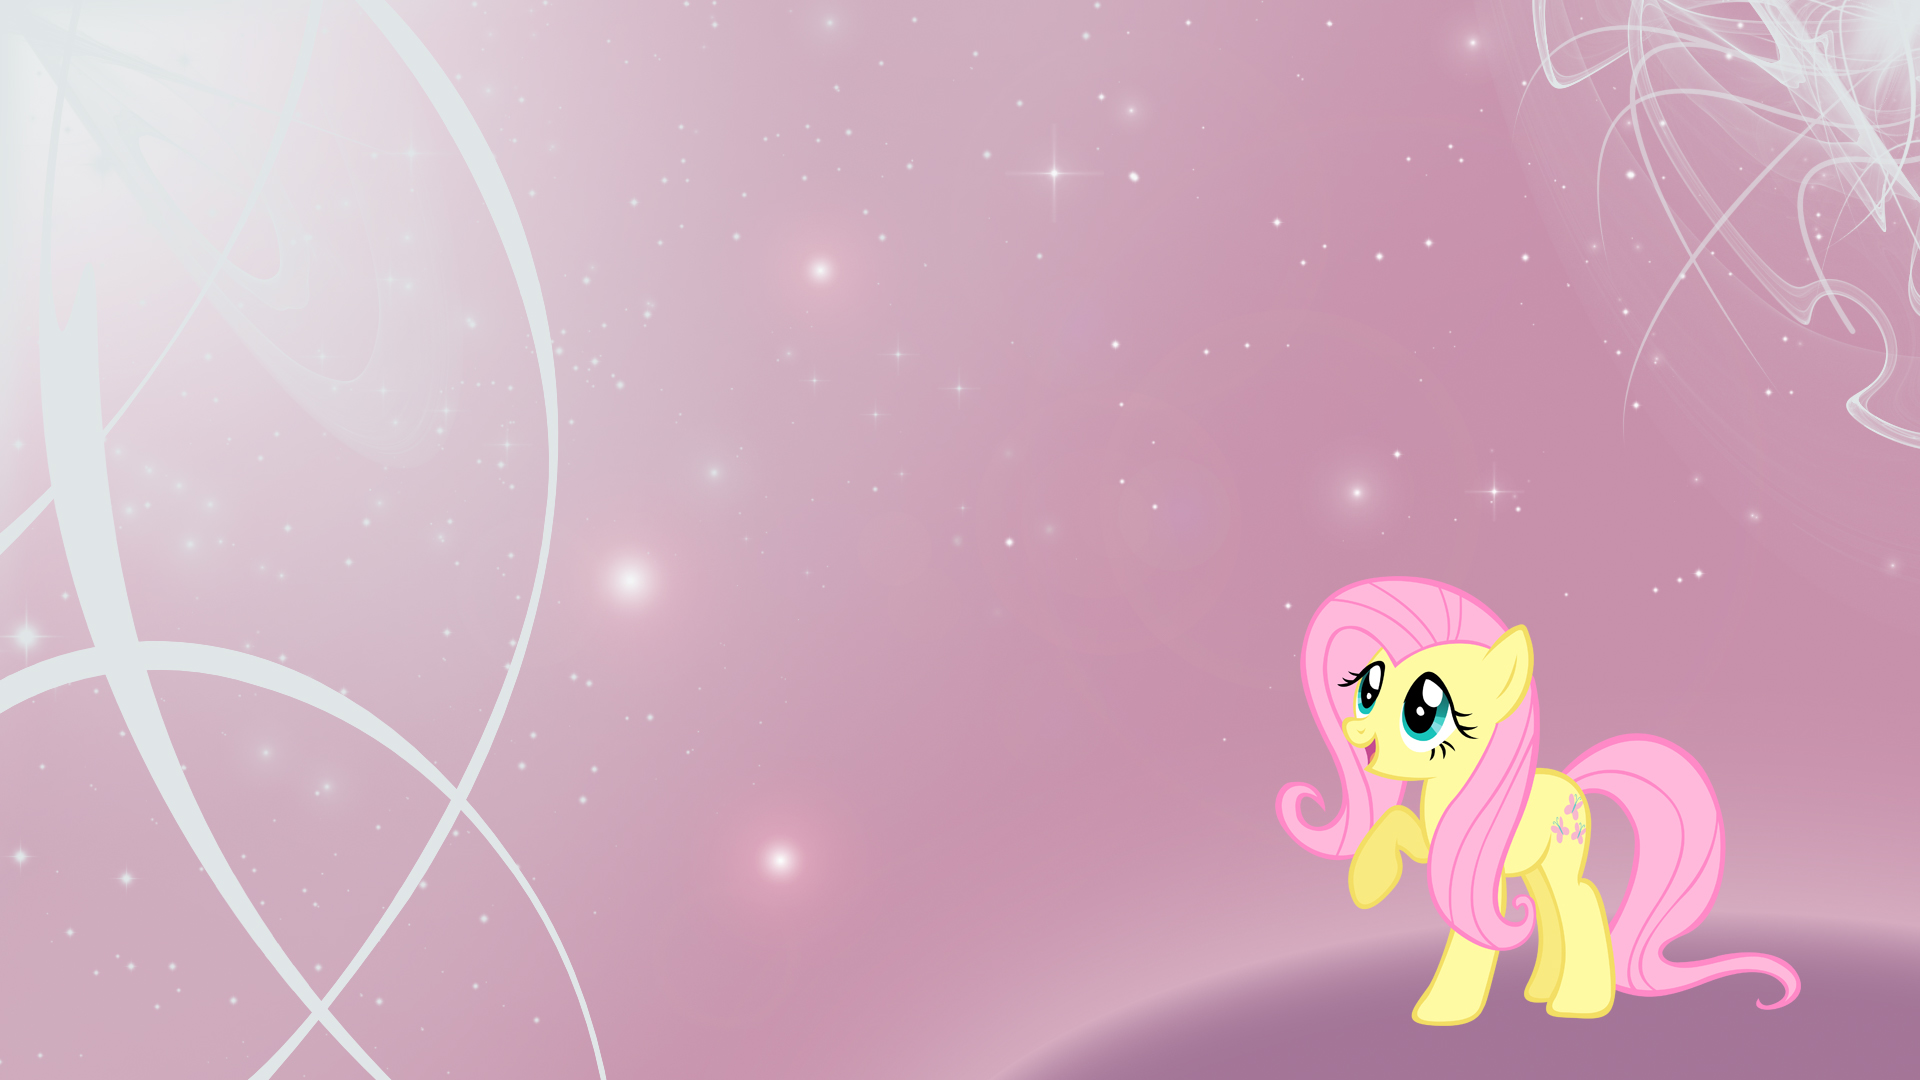 MLP: FiM - Fluttershy V1 by LilCinnamon and Unfiltered-N